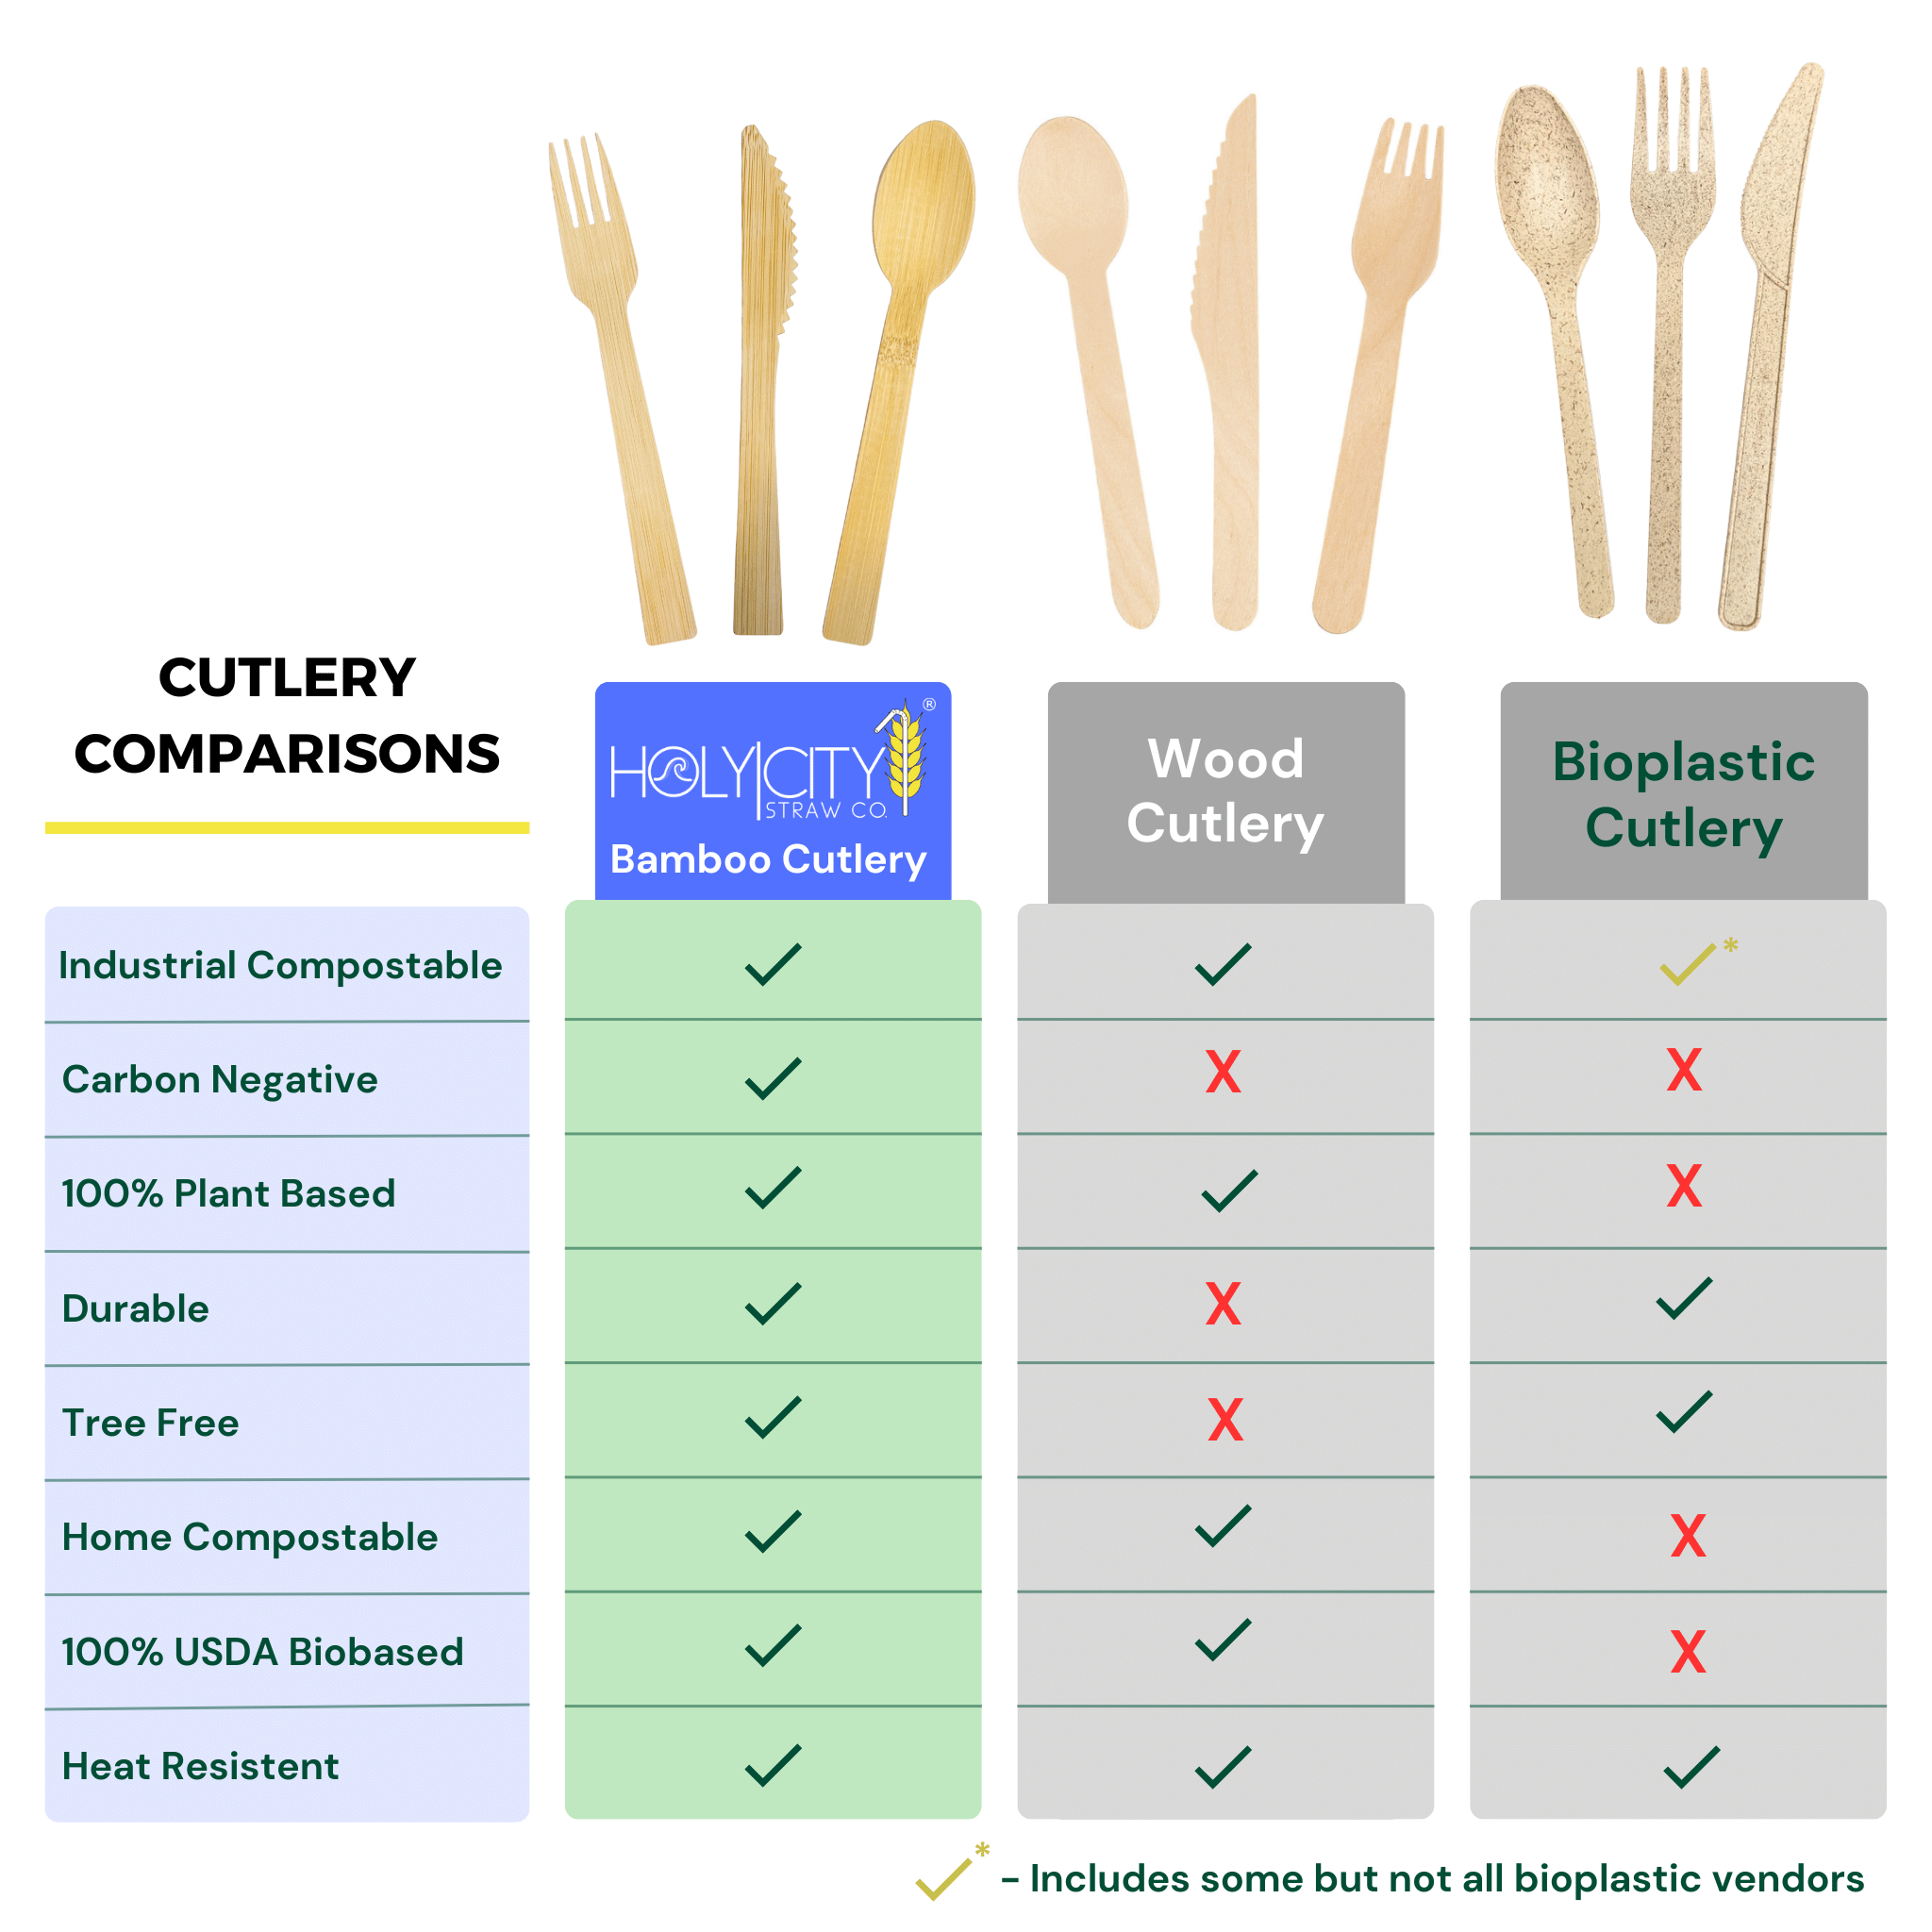 Comparison chart showcasing Holy City Straw Co. bamboo cutlery benefits against wood and bioplastic alternatives highlighting industrial compostability carbo negativity durability